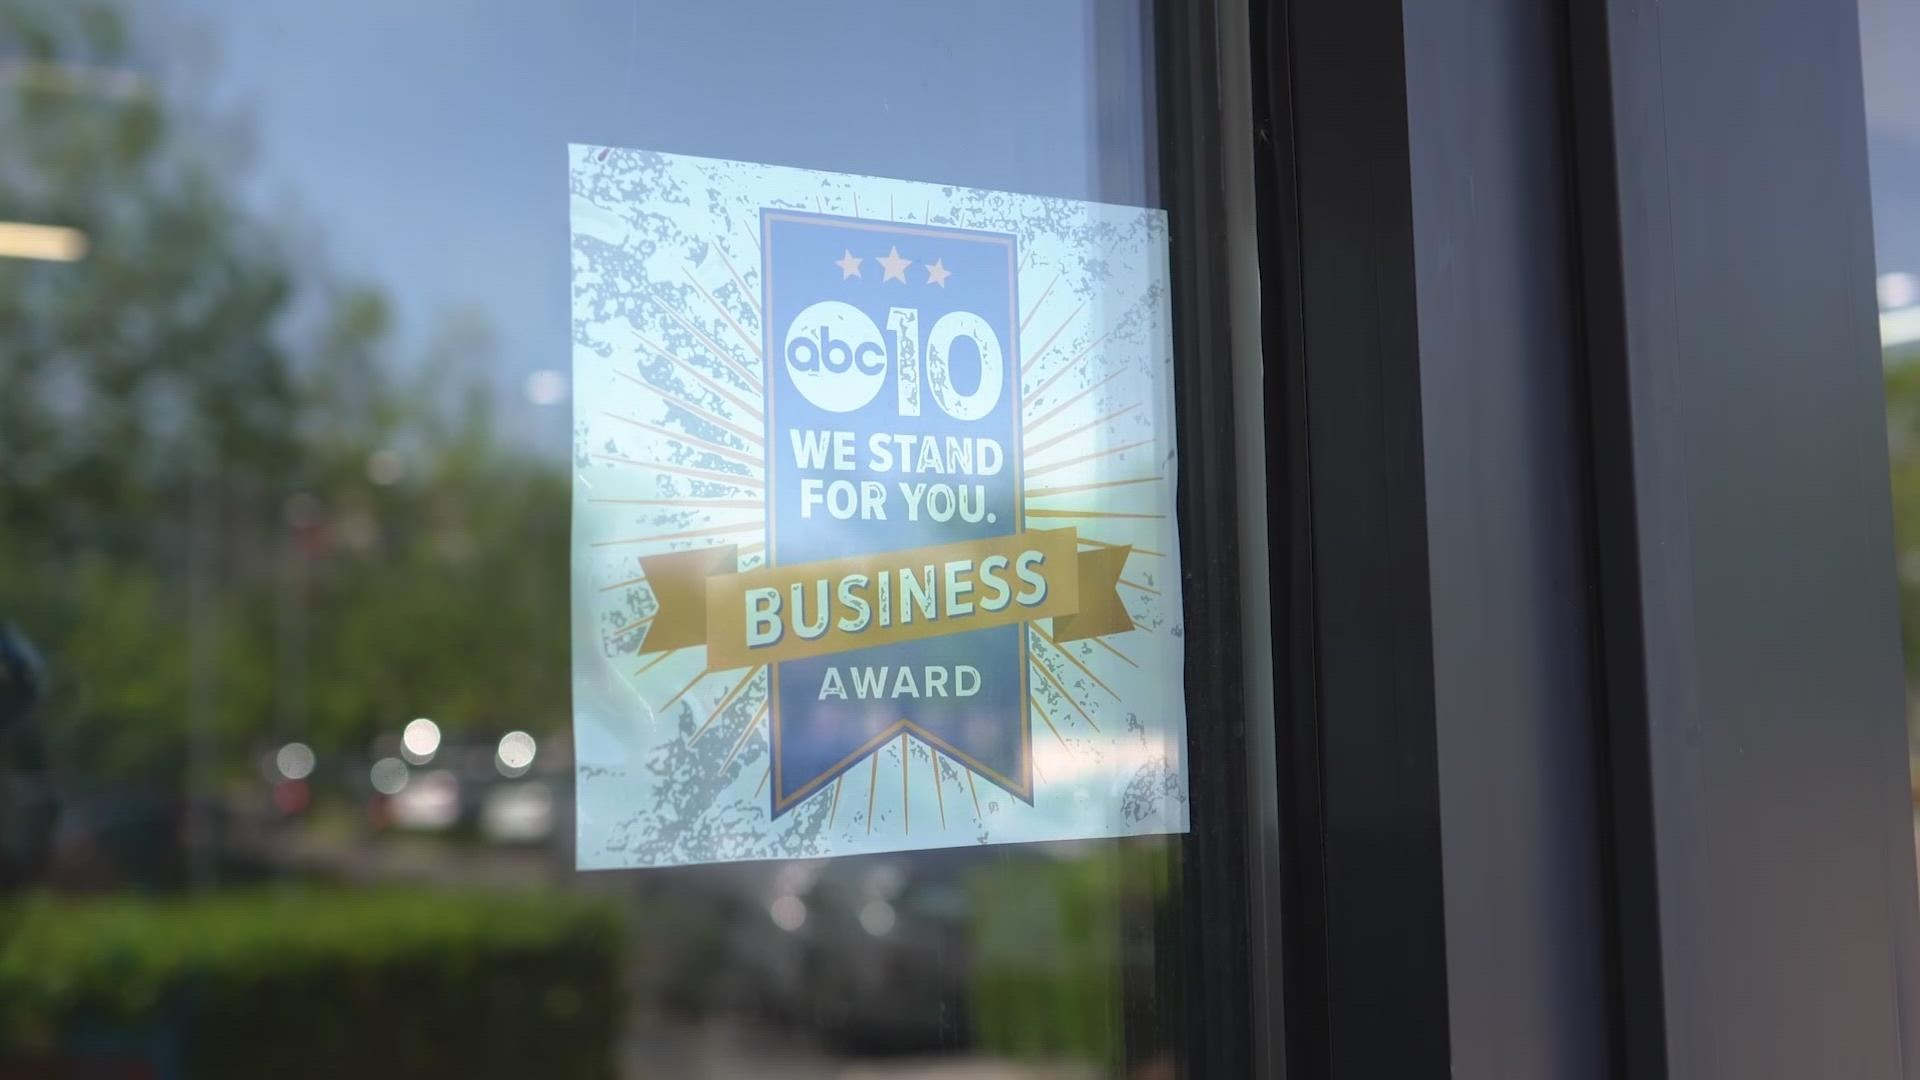 “Winning this award means the world to us because it speaks to the power of our mission and community work as a new business that opened during the pandemic."